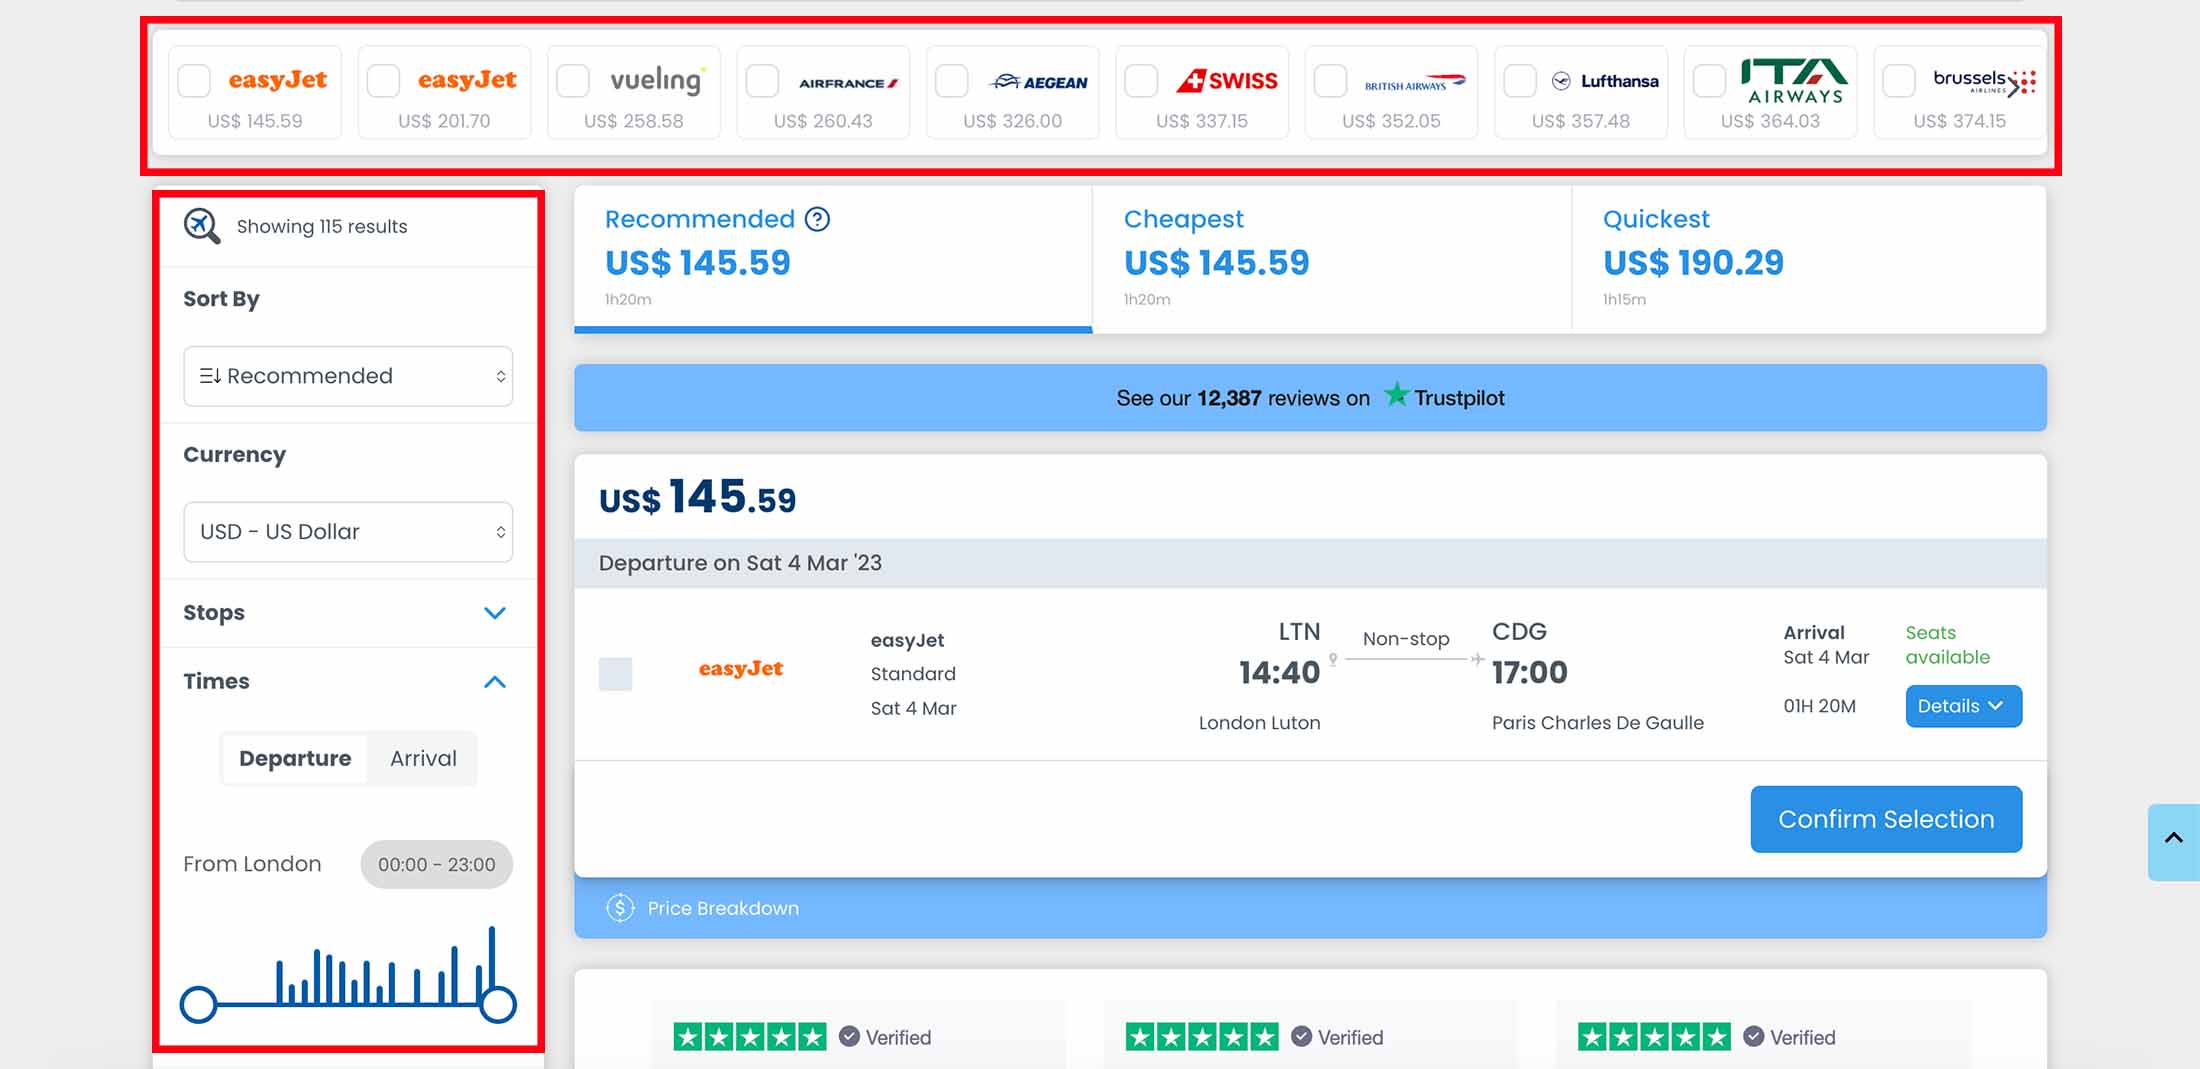 Flights will appear with multiple options for filtering flights. 